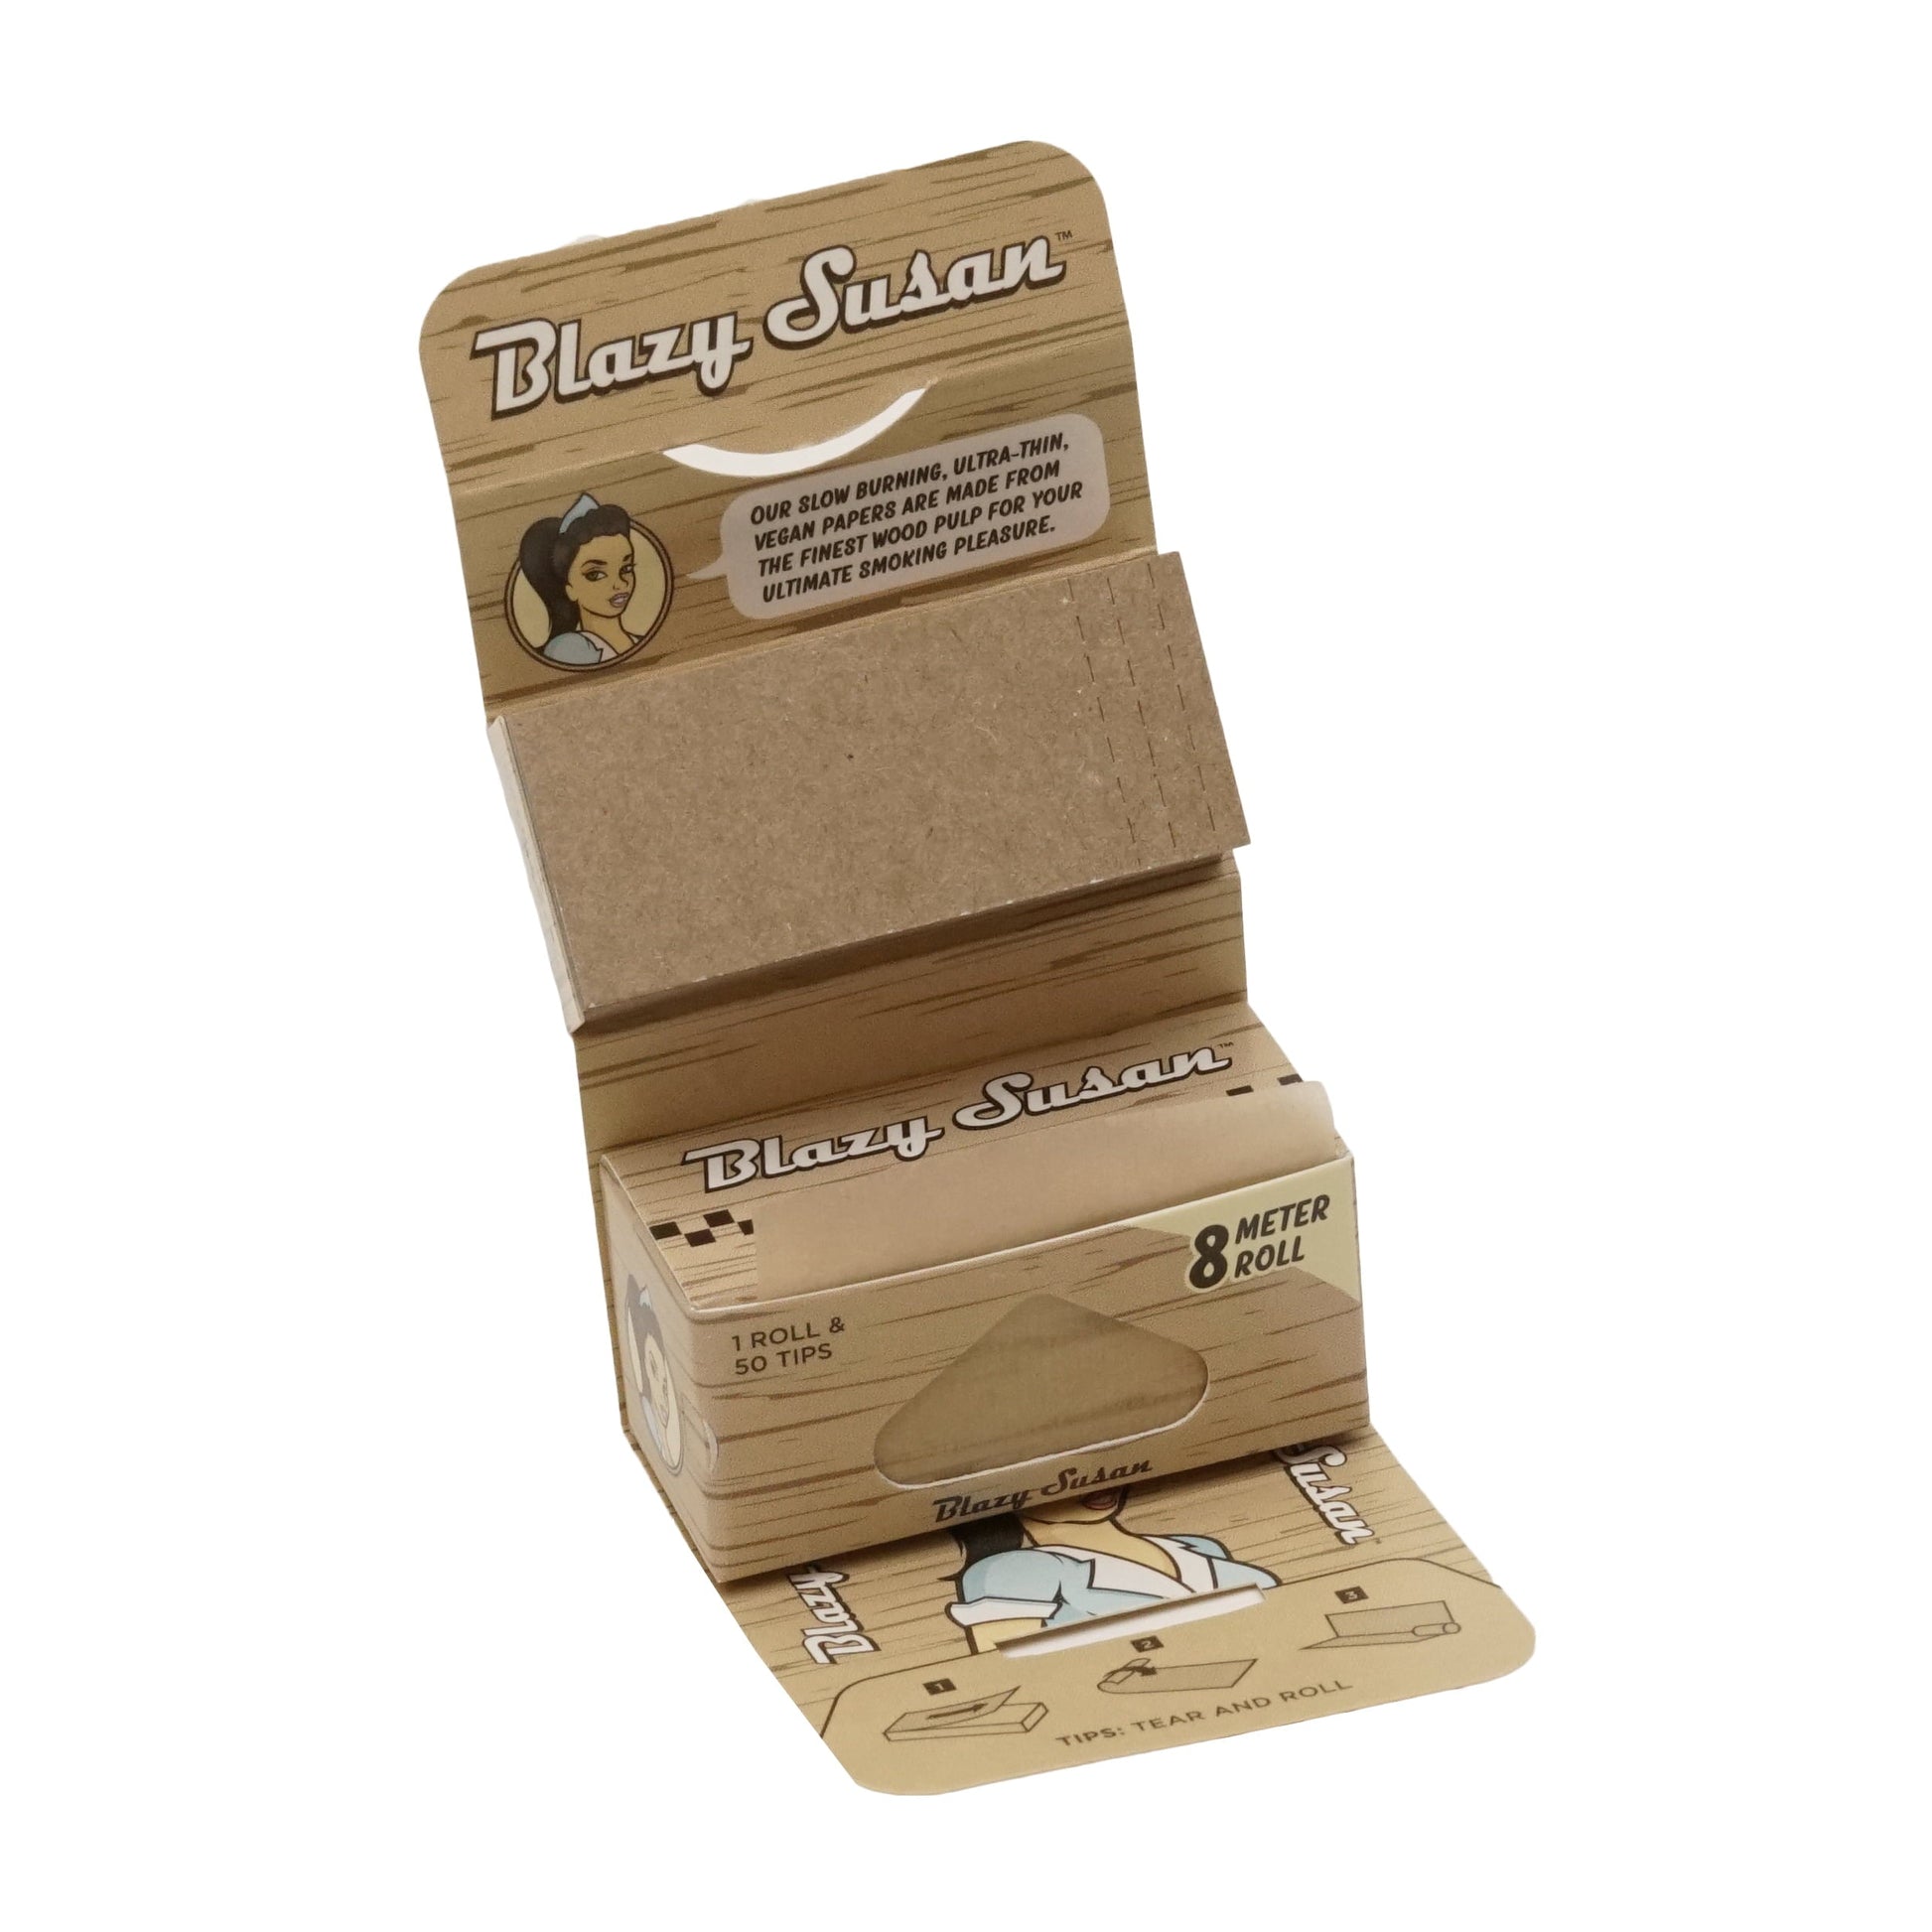 Blazy Susan | Unbleached High roller kit Box of 16_1